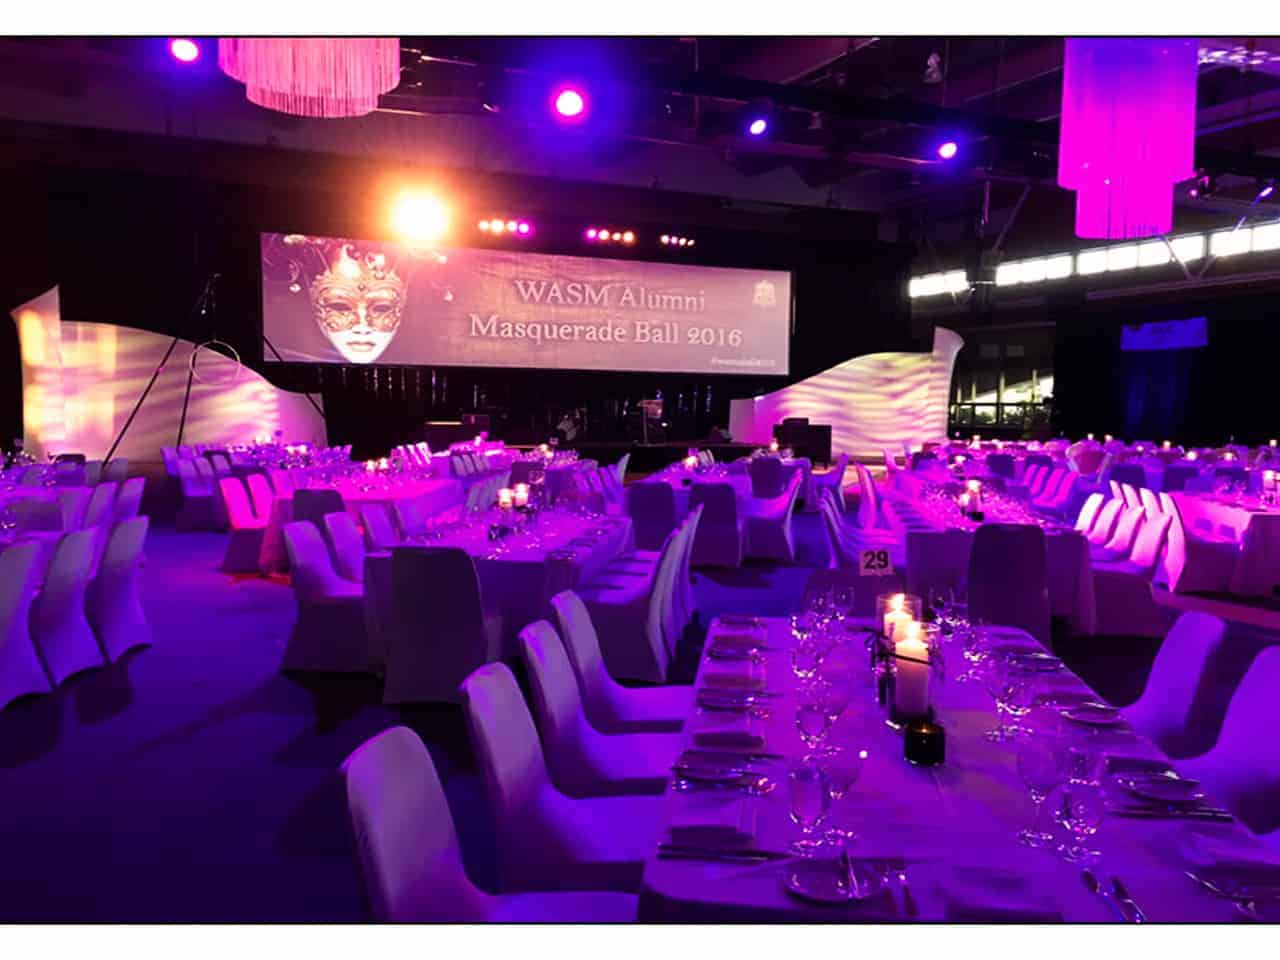 Large venue for events